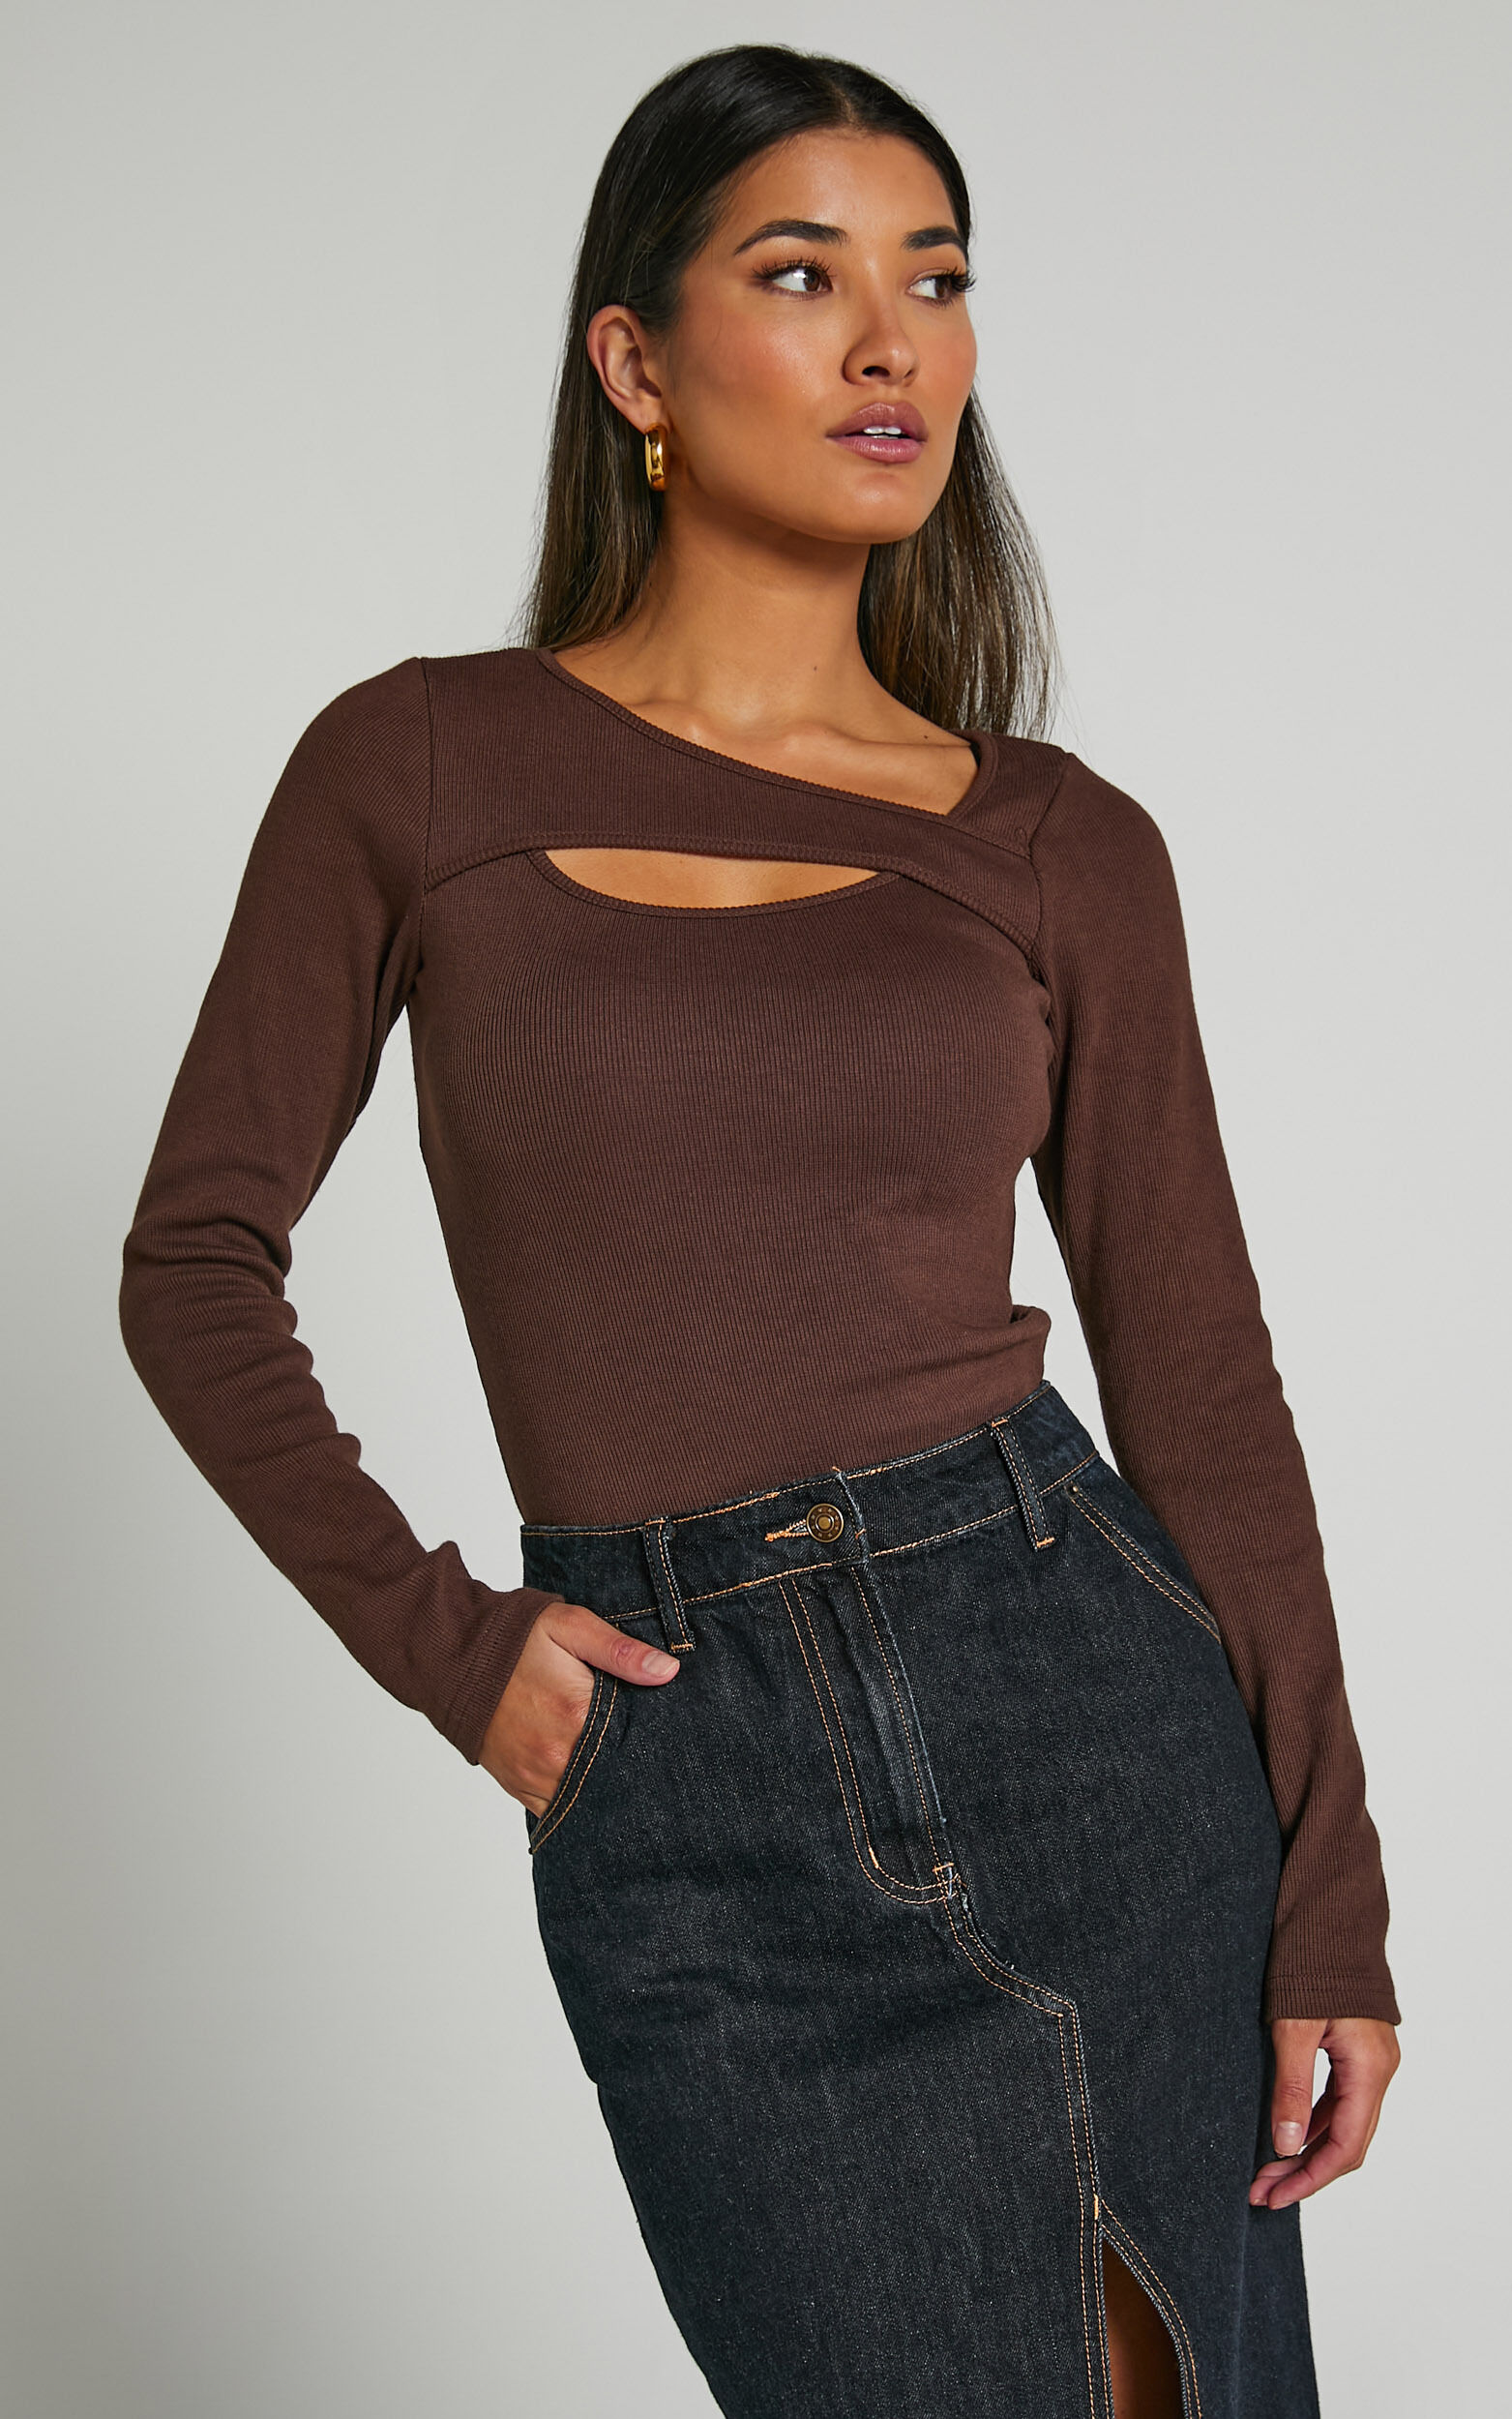 Remi Top - Long Sleeve Asymmetric Cut Out Top in Brown - 06, BRN1